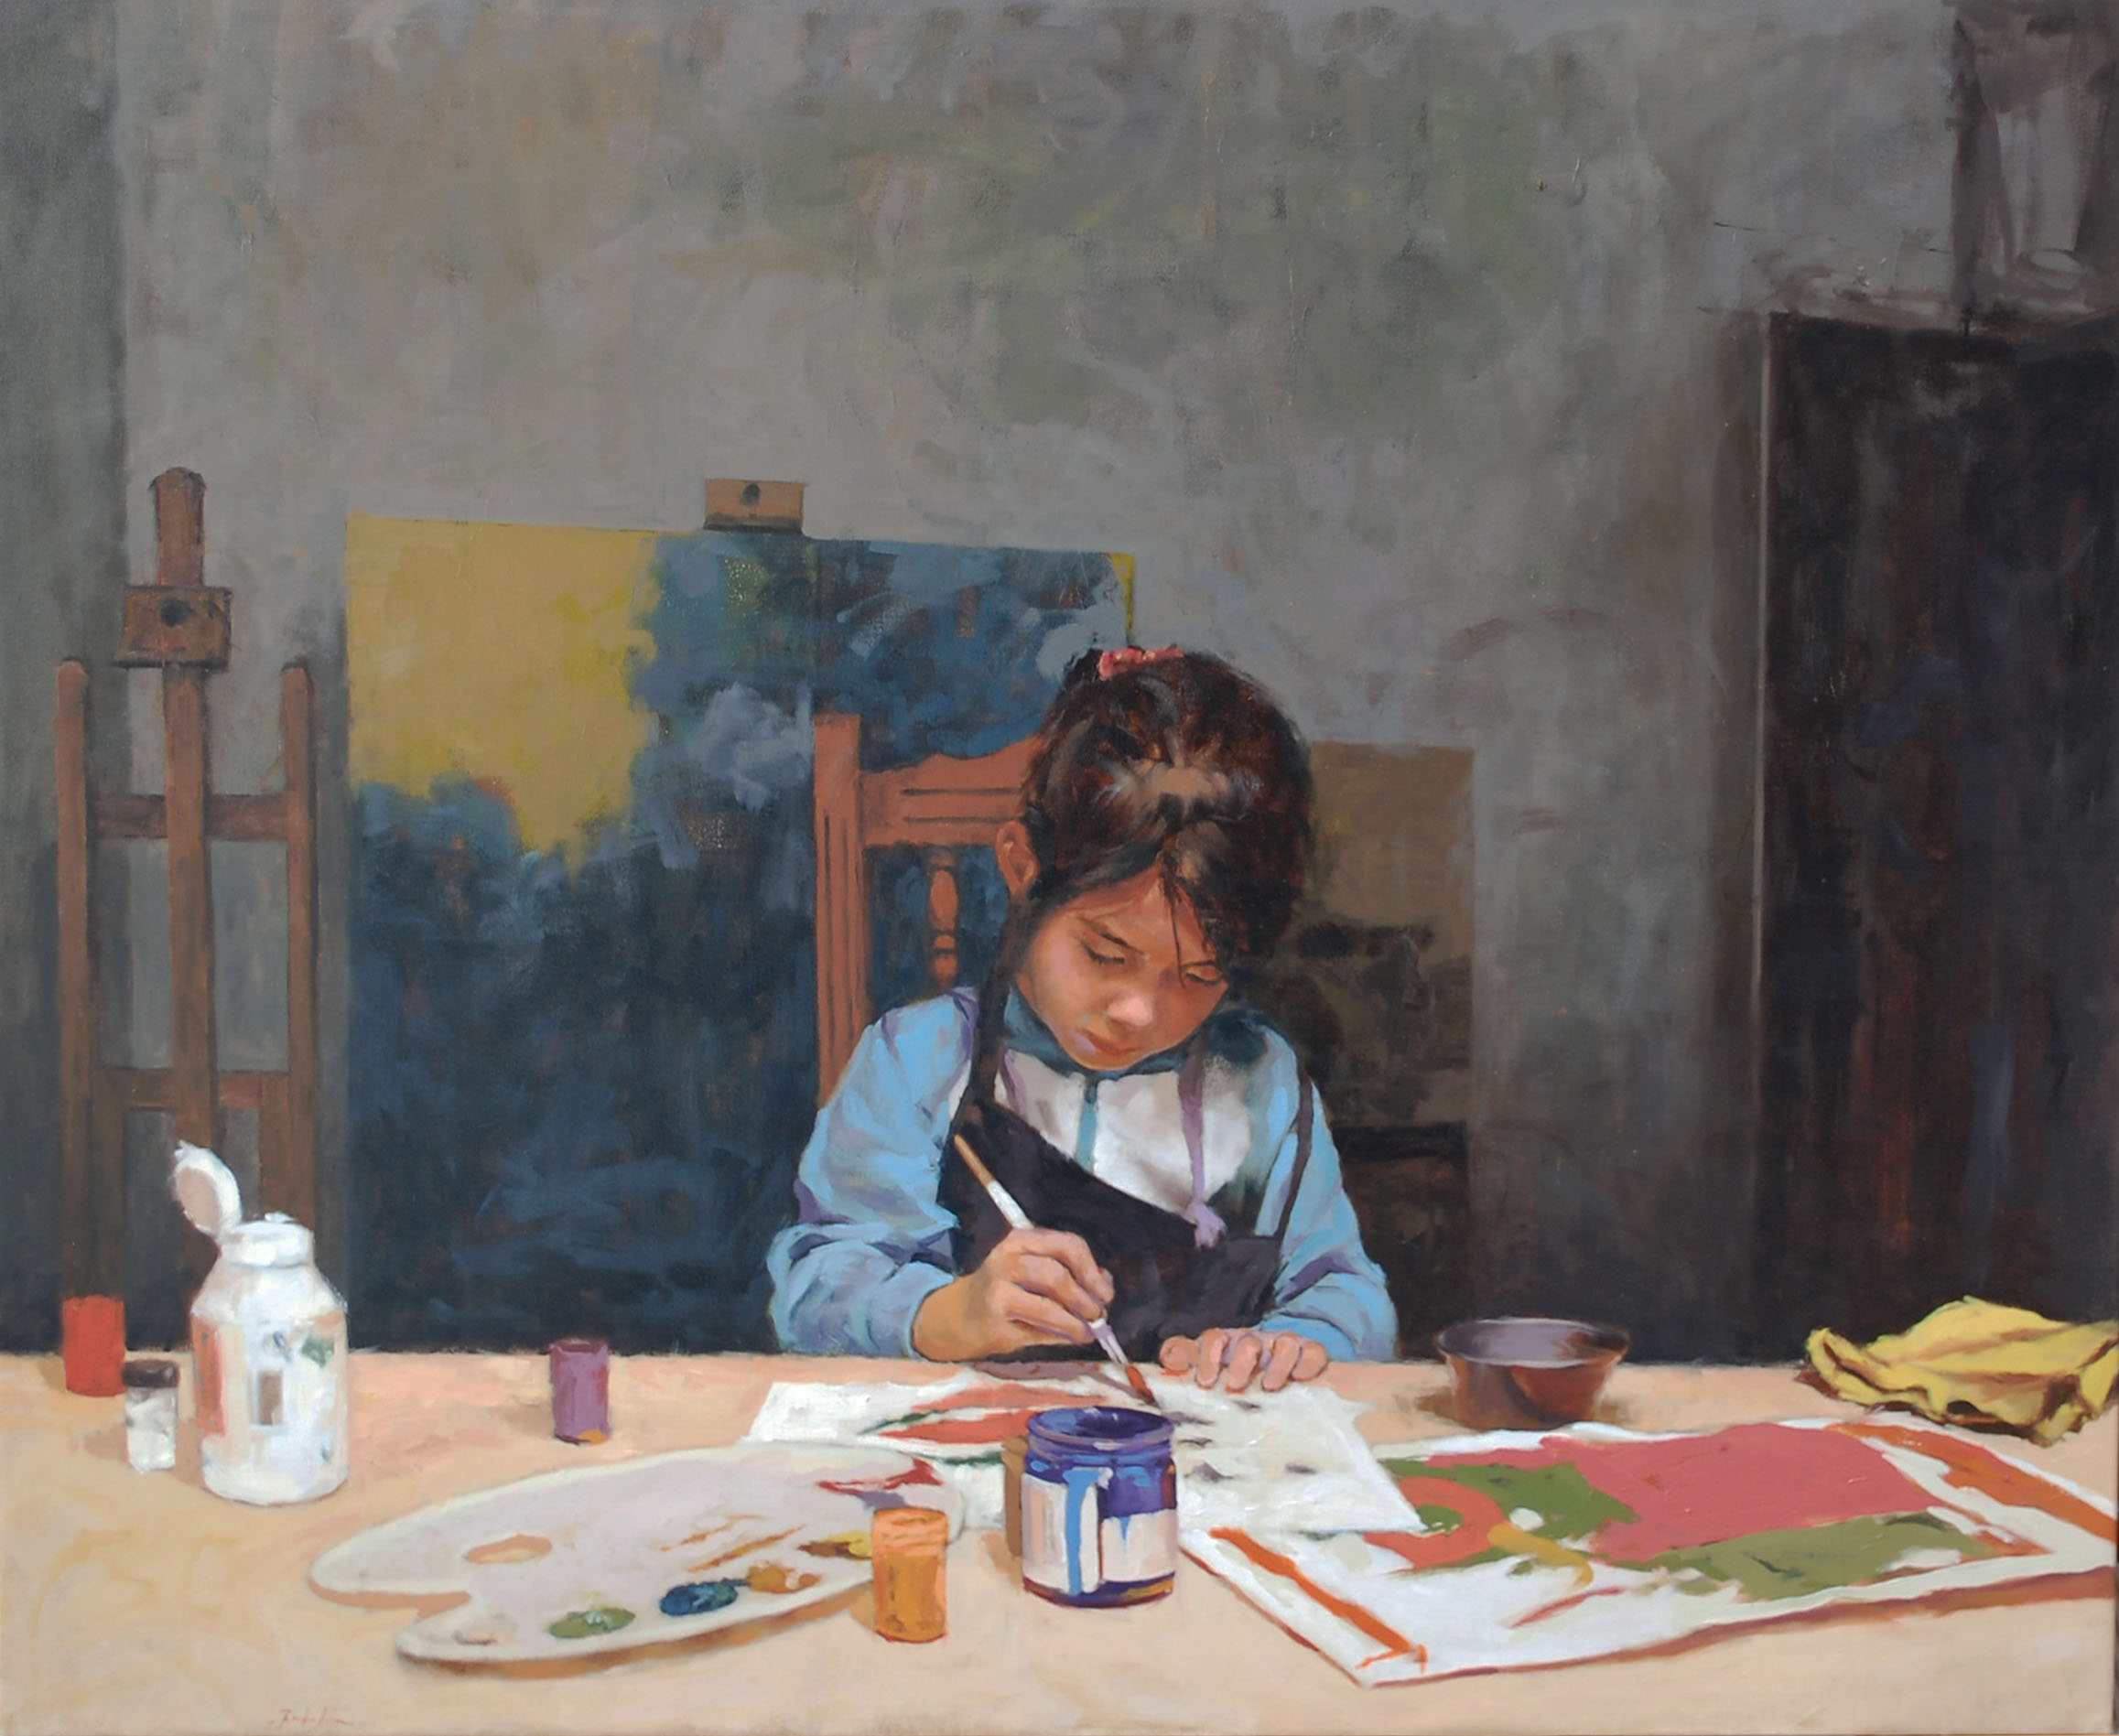 Contemporary Realism Painting of a girl making art